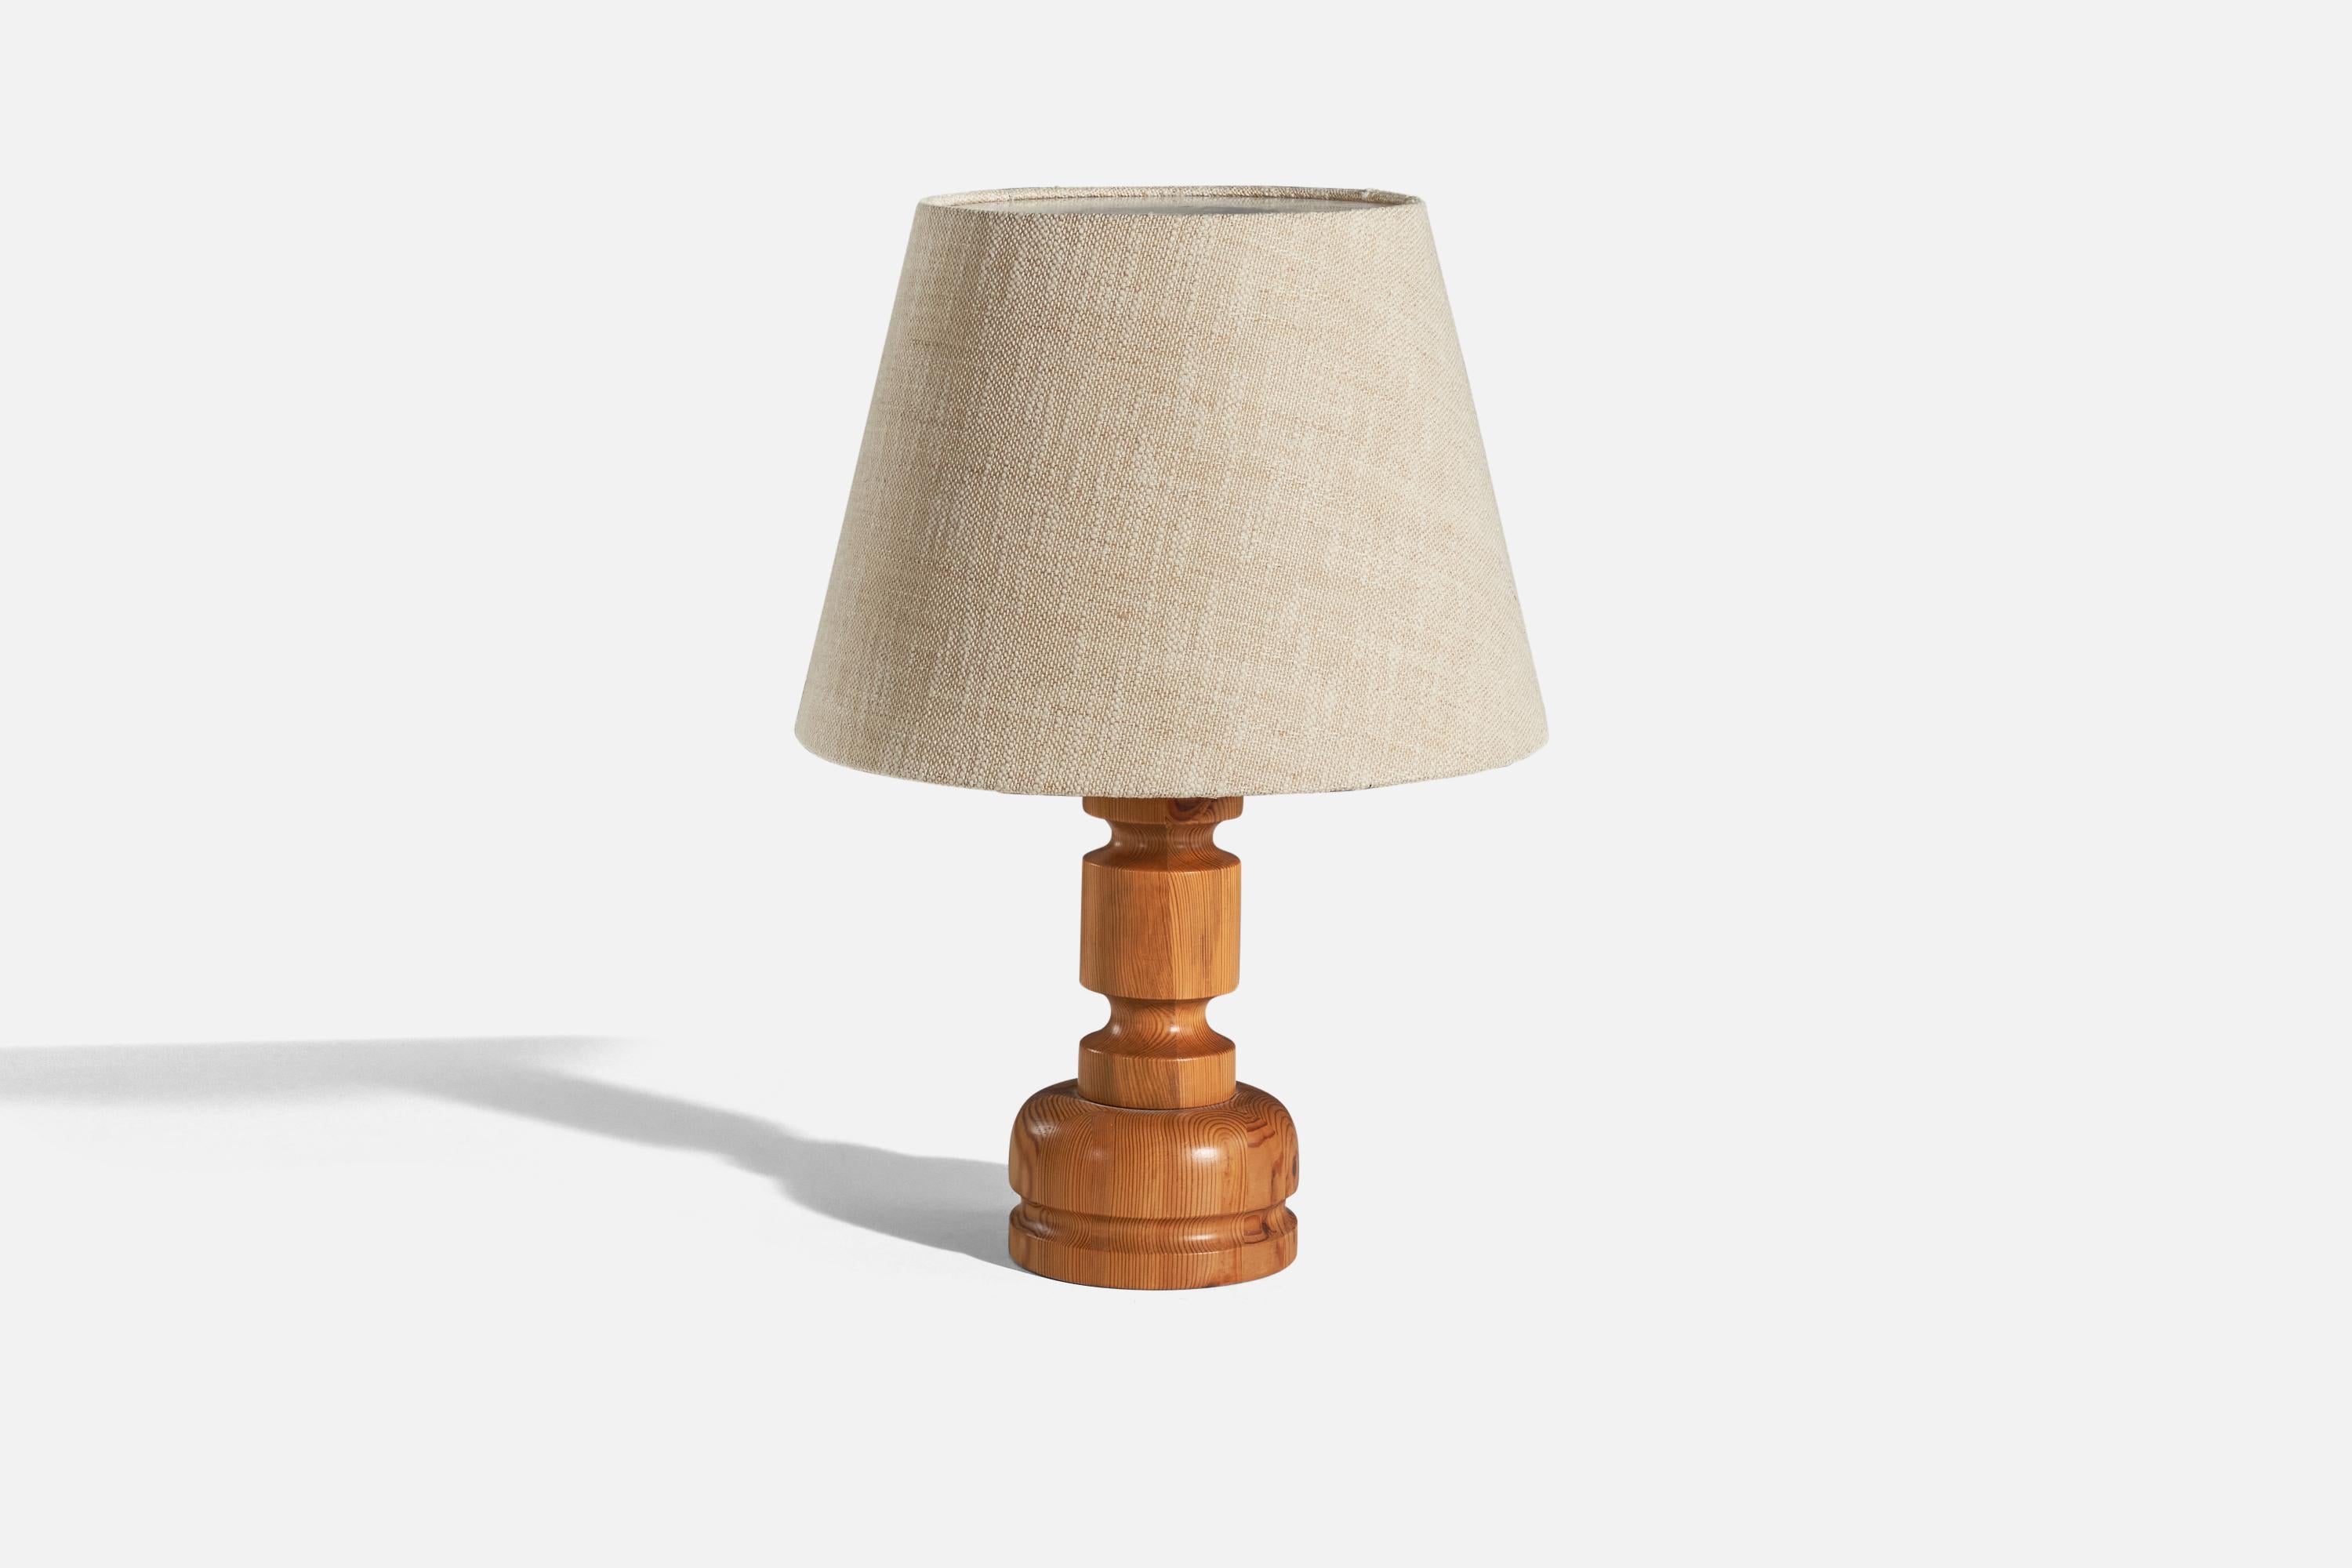 A pine and fabric table lamp designed by Stig Johnsson and produced by Smålandsslöjd in Sweden, c. 1970s.

Sold with lampshade. 
Dimensions of Lamp (inches) : 14.06 x 6.12 x 6.12 (H x W x D)
Dimensions of Shade (inches) : 10.5 x 16 x 11.5 (T x B